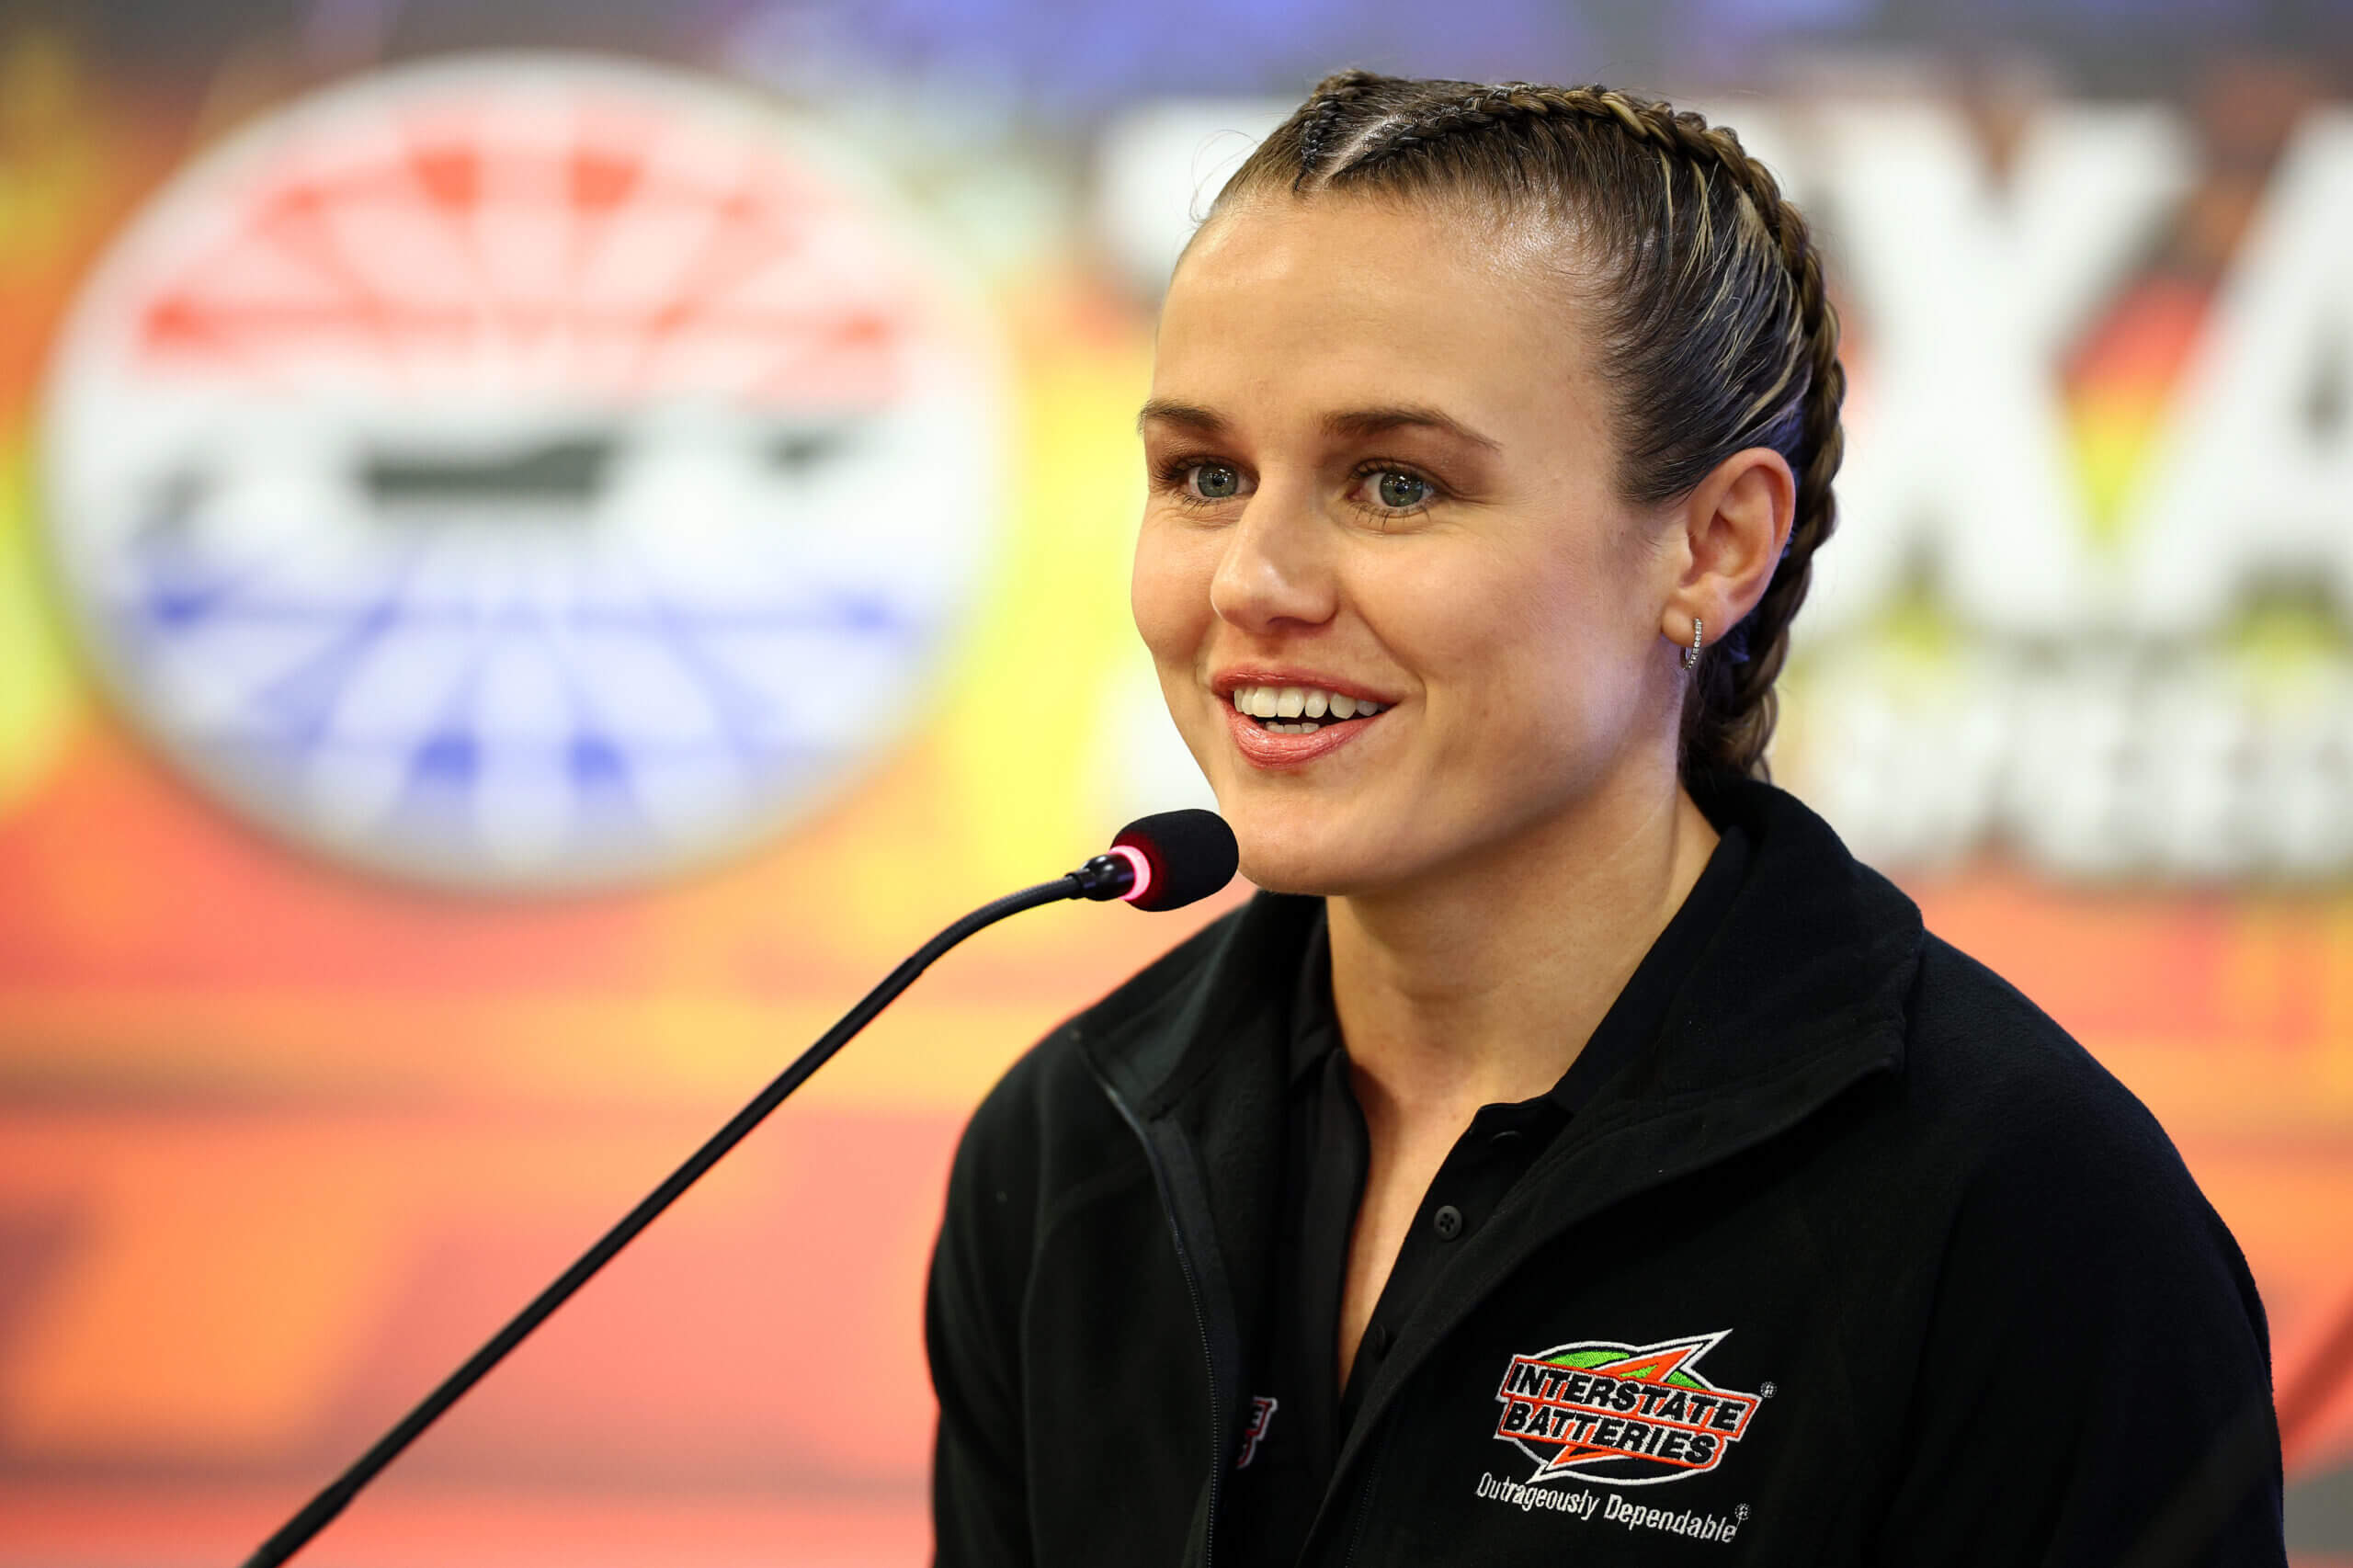 For McKenna Haase, who sold batteries to fund her dirt racing, a fitting career boost arrives